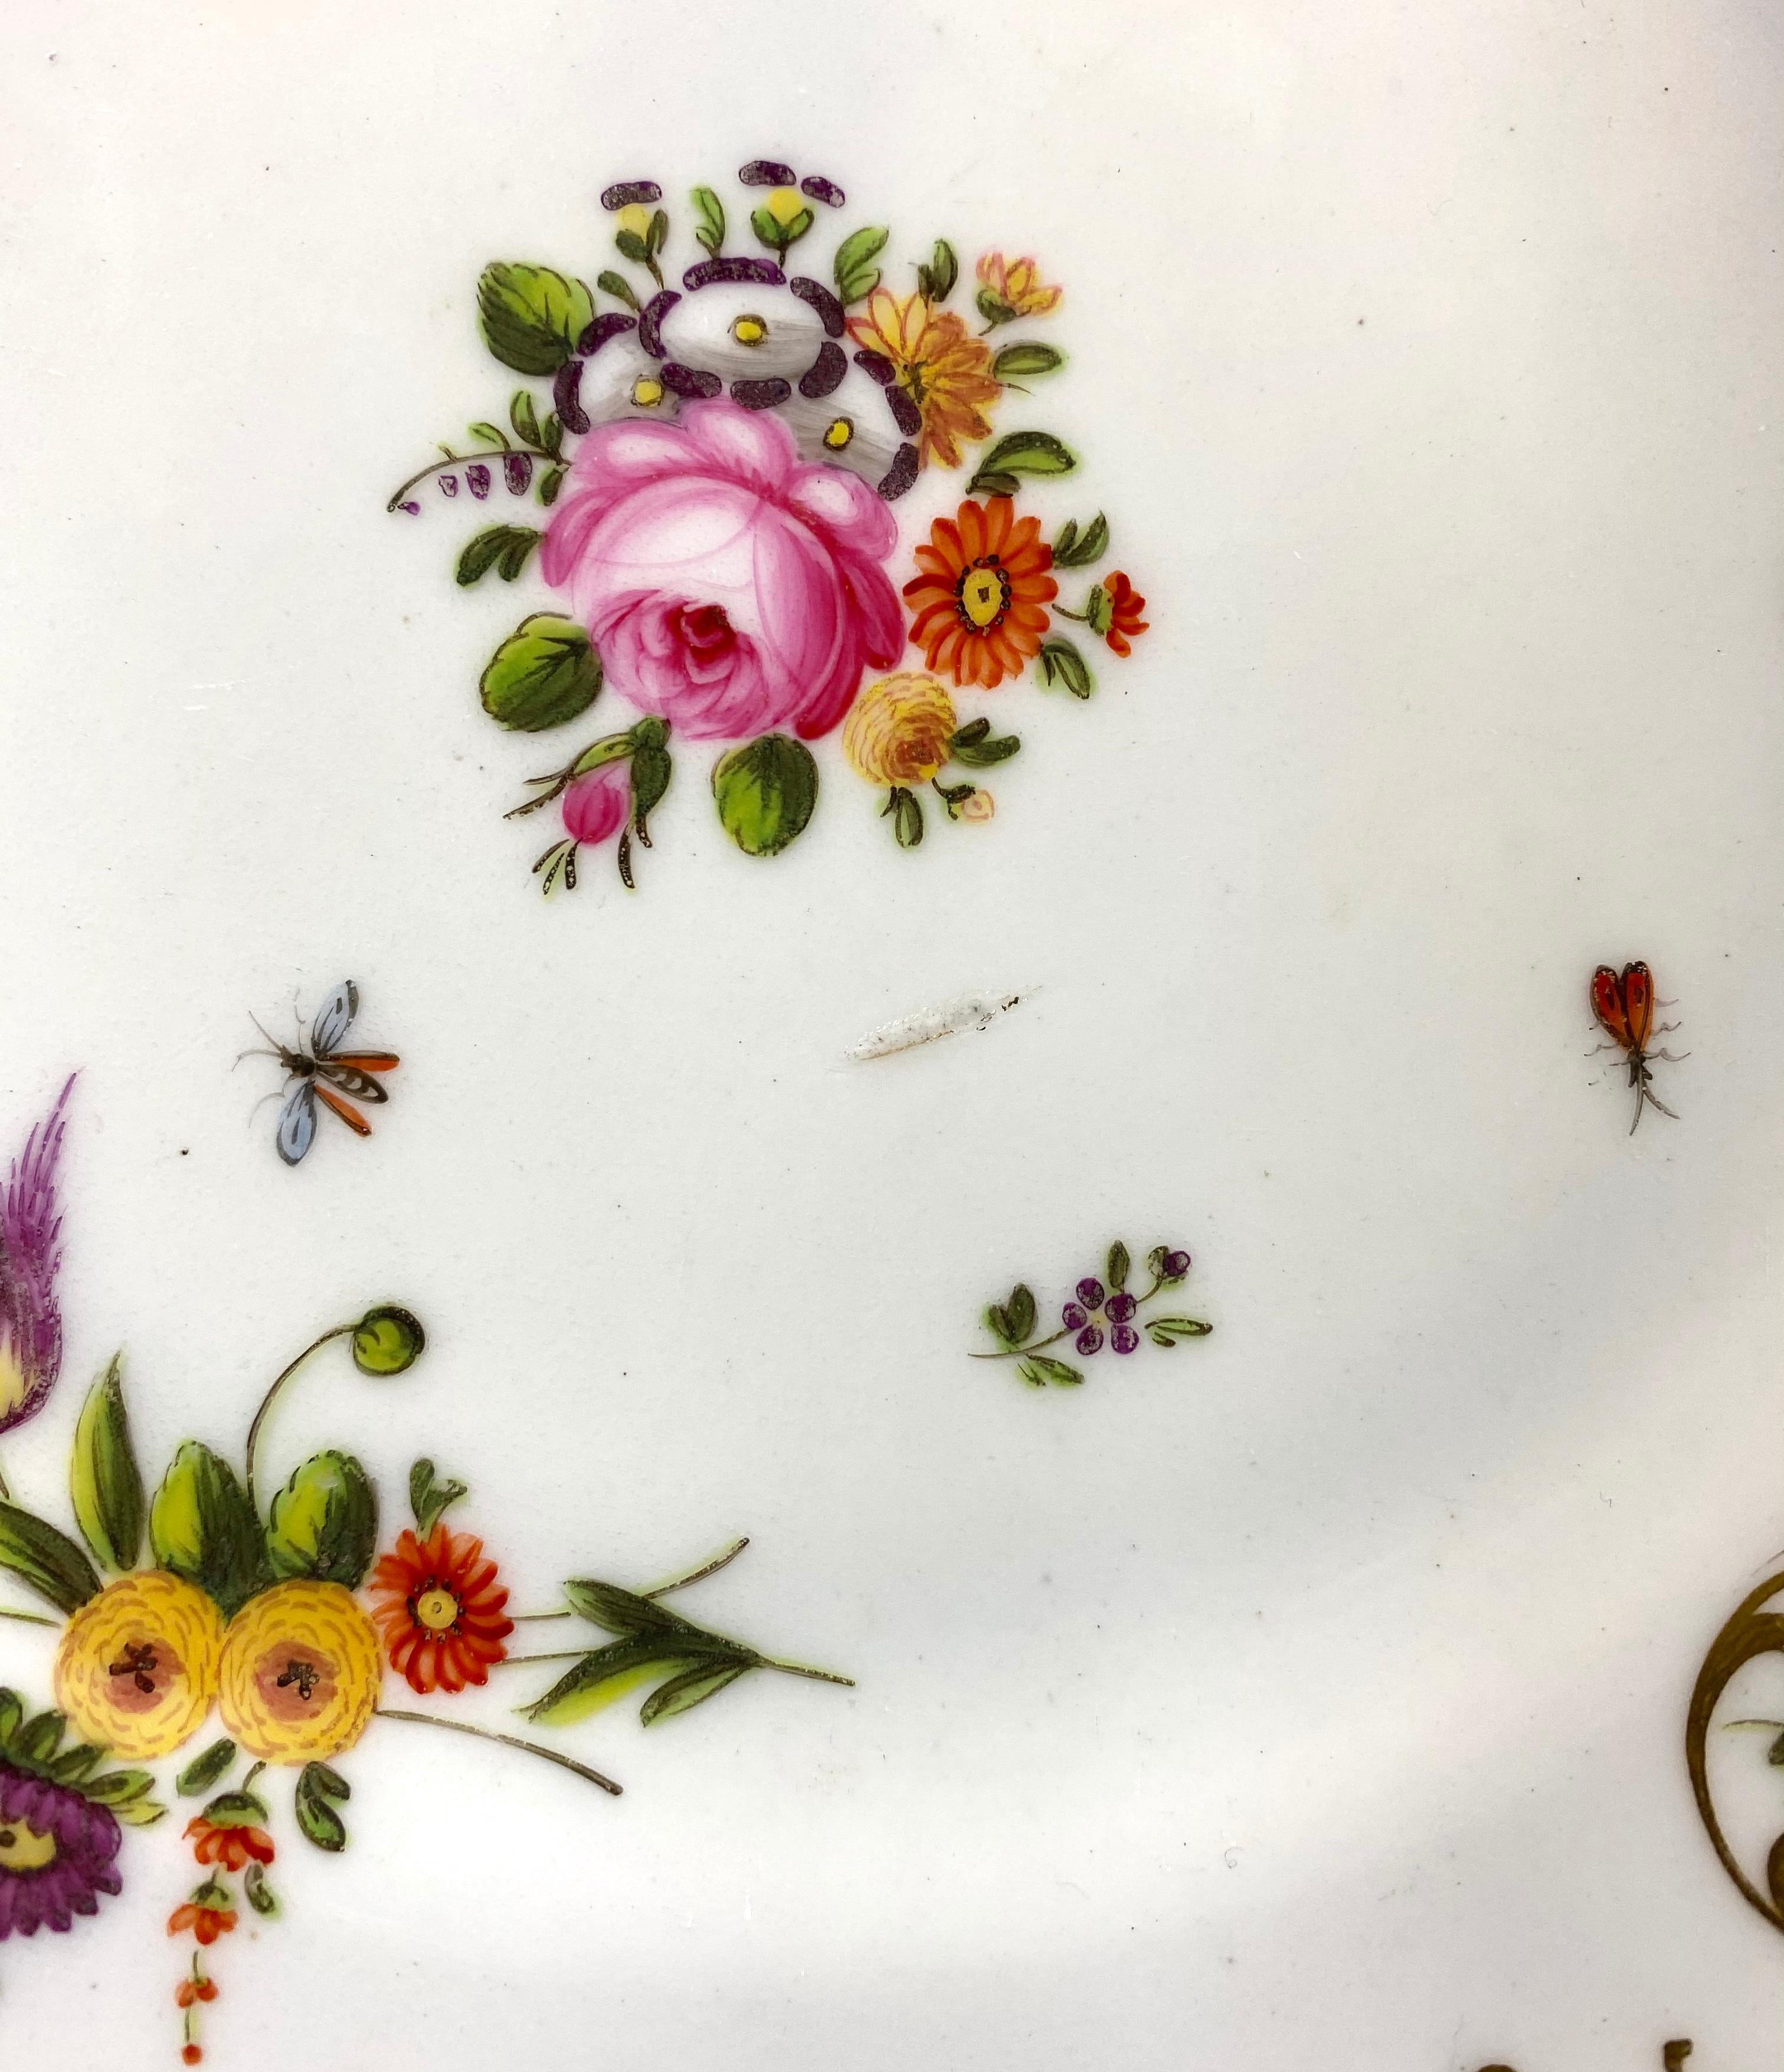 Swansea Porcelain dish, circa 1815. Hand painted to the center, with a spray of flowers, and three further sprays towards the rim. Interspersed, with sprigs of flowers, and flying insects. The border with elaborate gilt scrollwork, and a ladybird